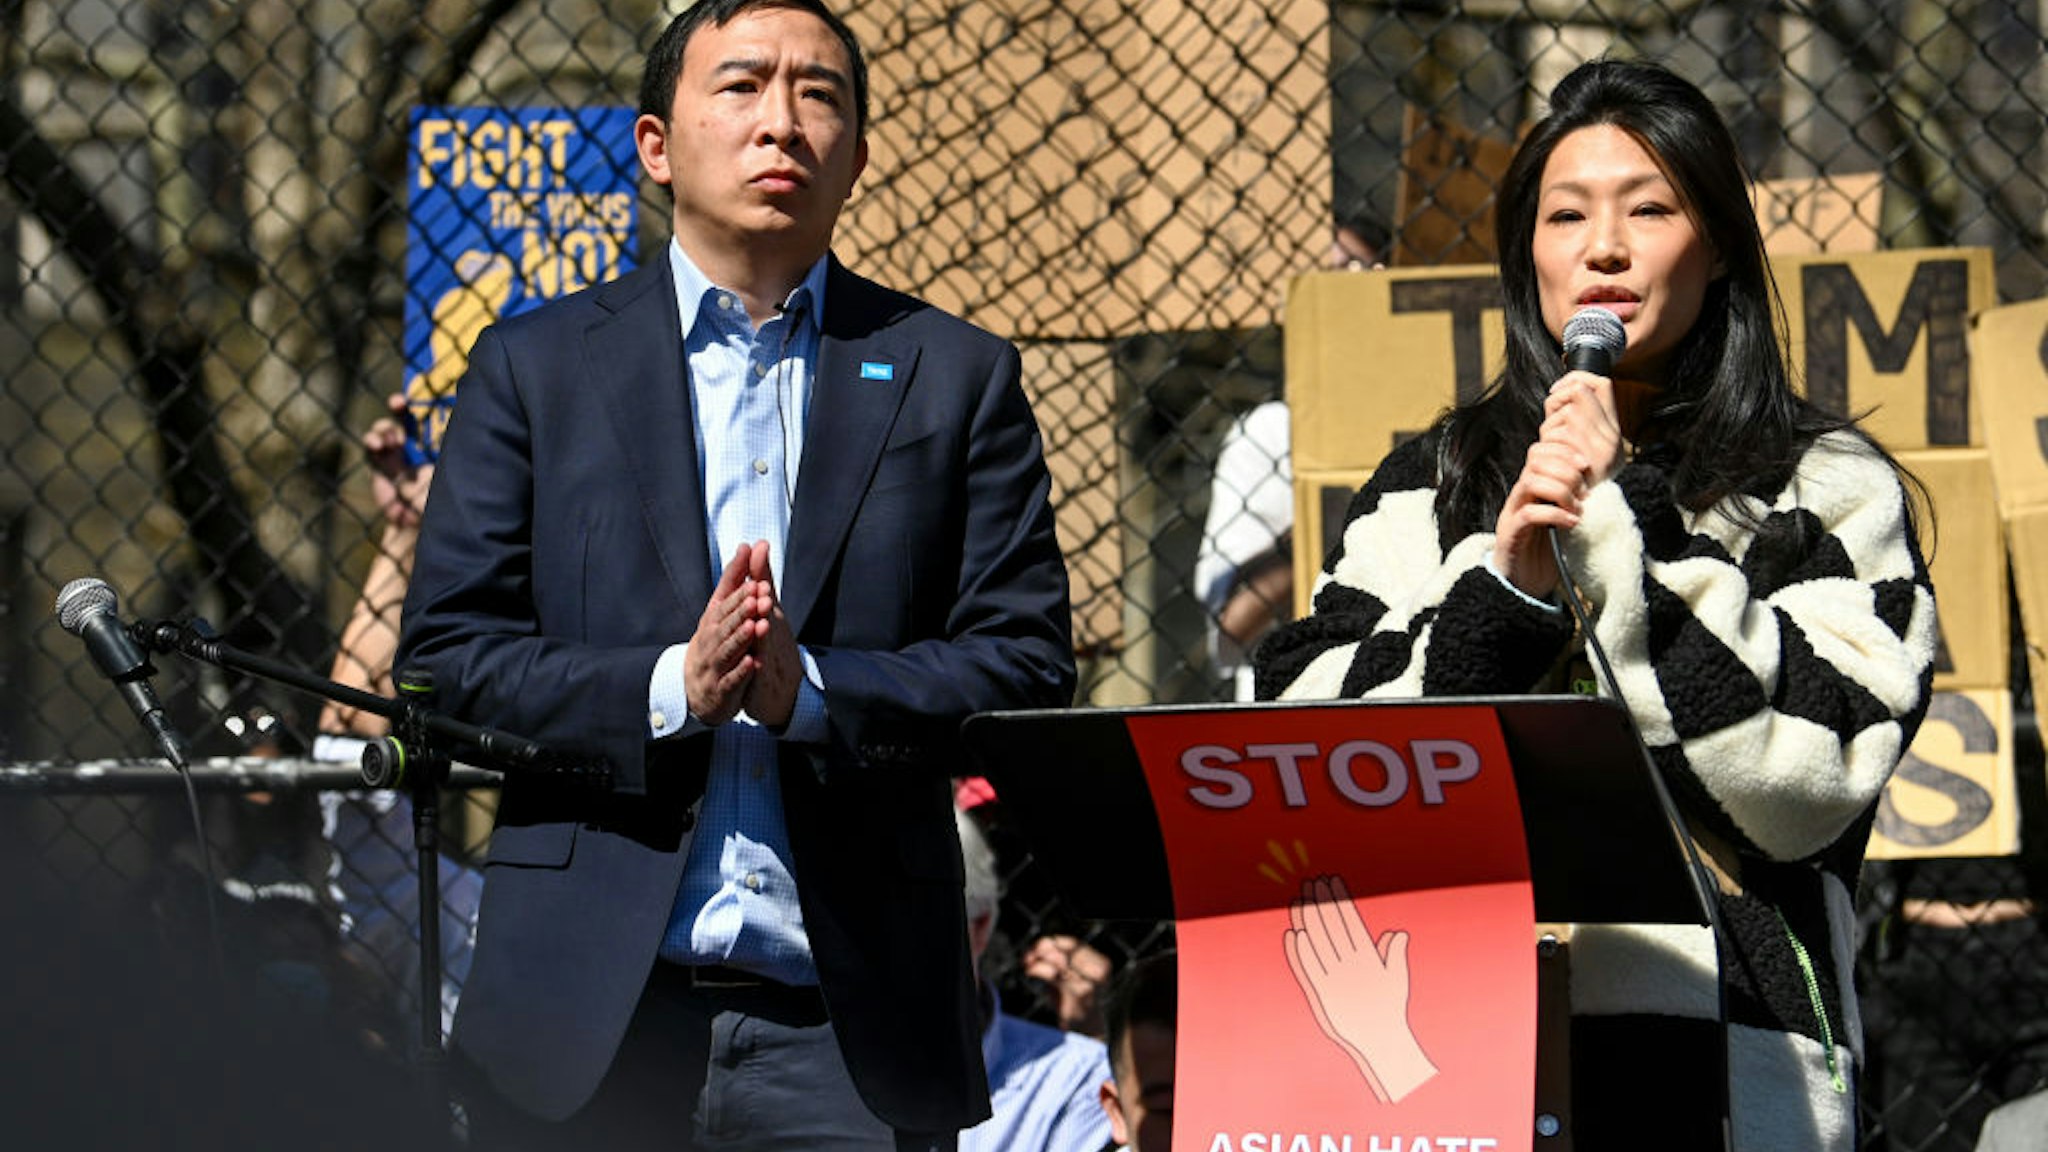 NEW YORK, NEW YORK - MARCH 21: New York City Mayoral candidate Andrew Yang stands next to his wife, Evelyn Yang, while she speaks at the "Rally Against Hate" in Columbus Park, Chinatown on March 21, 2021 in New York City. Stop Asian Hate rallies have been happening in New York City and other parts of the country after a year of that has seen a rise in hate crimes towards Asian Americans and the attack in Atlanta, Georgia on March 16, 2021 that left eight people dead, including six Asian women.